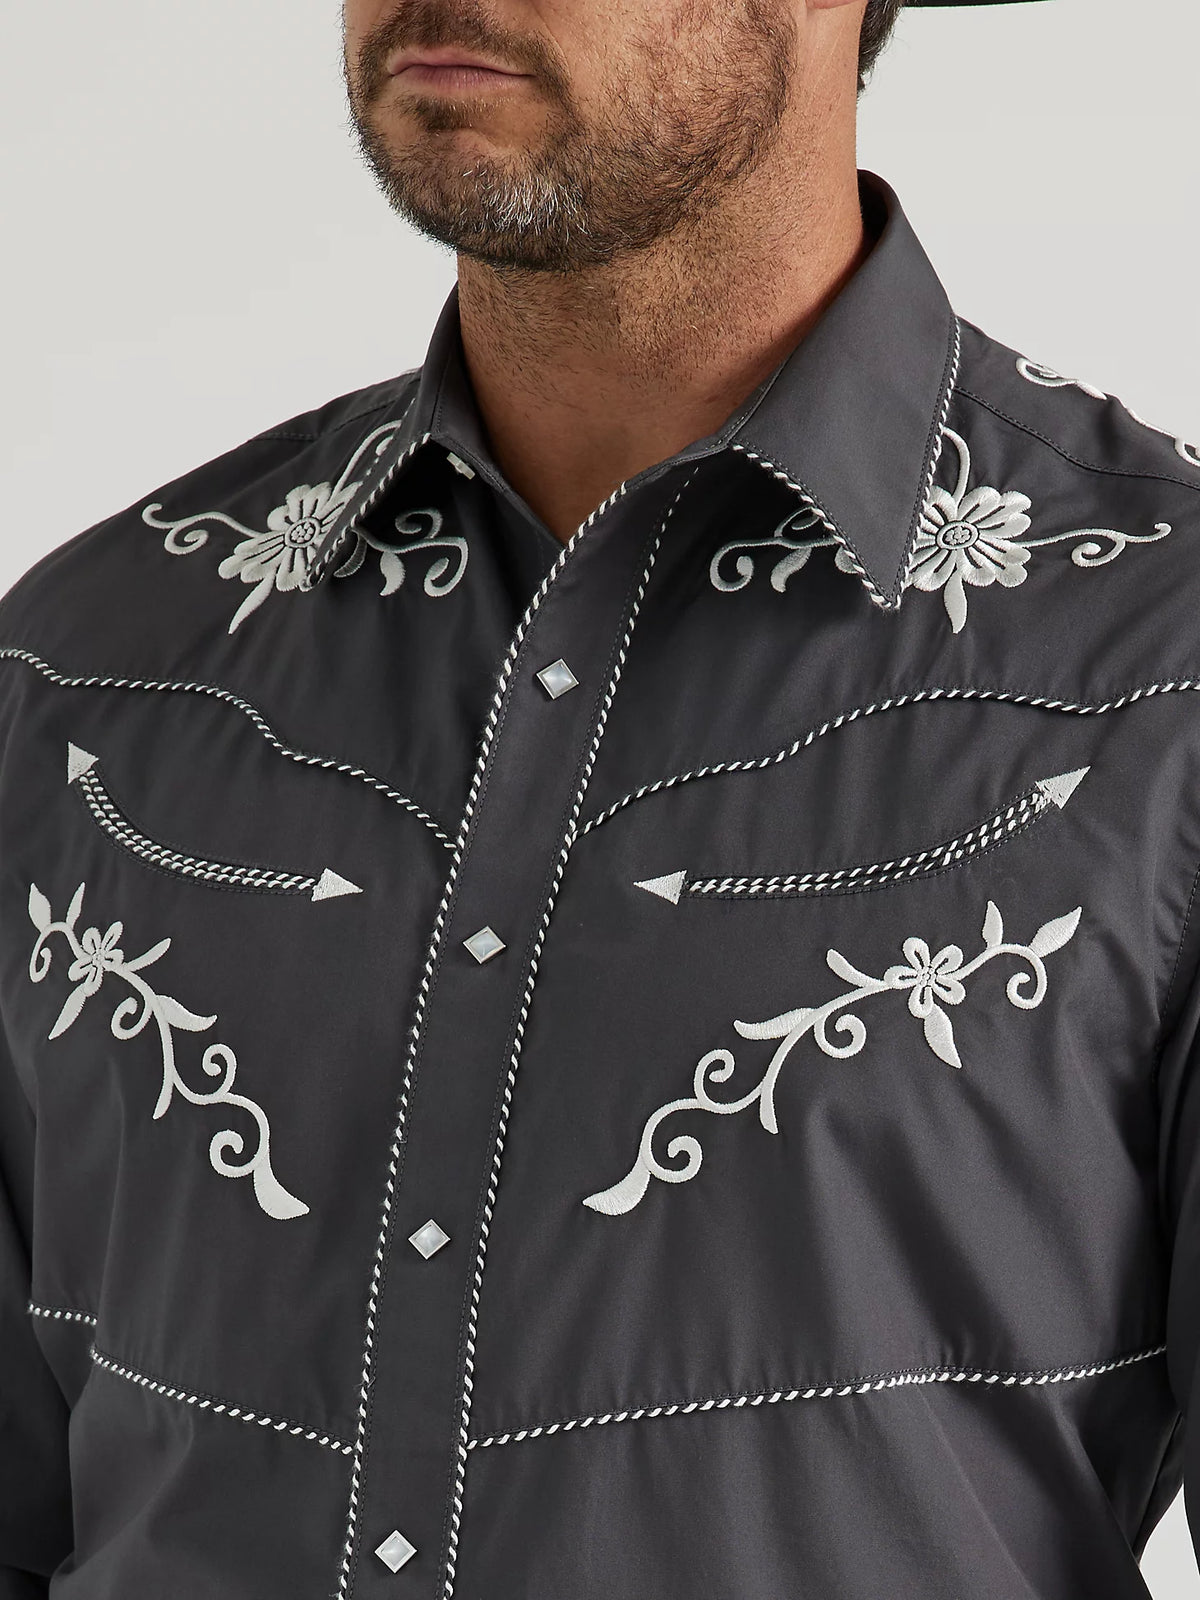 Lucky Brand Mens Pearl Snap Denim Western Shirt M Embroidered